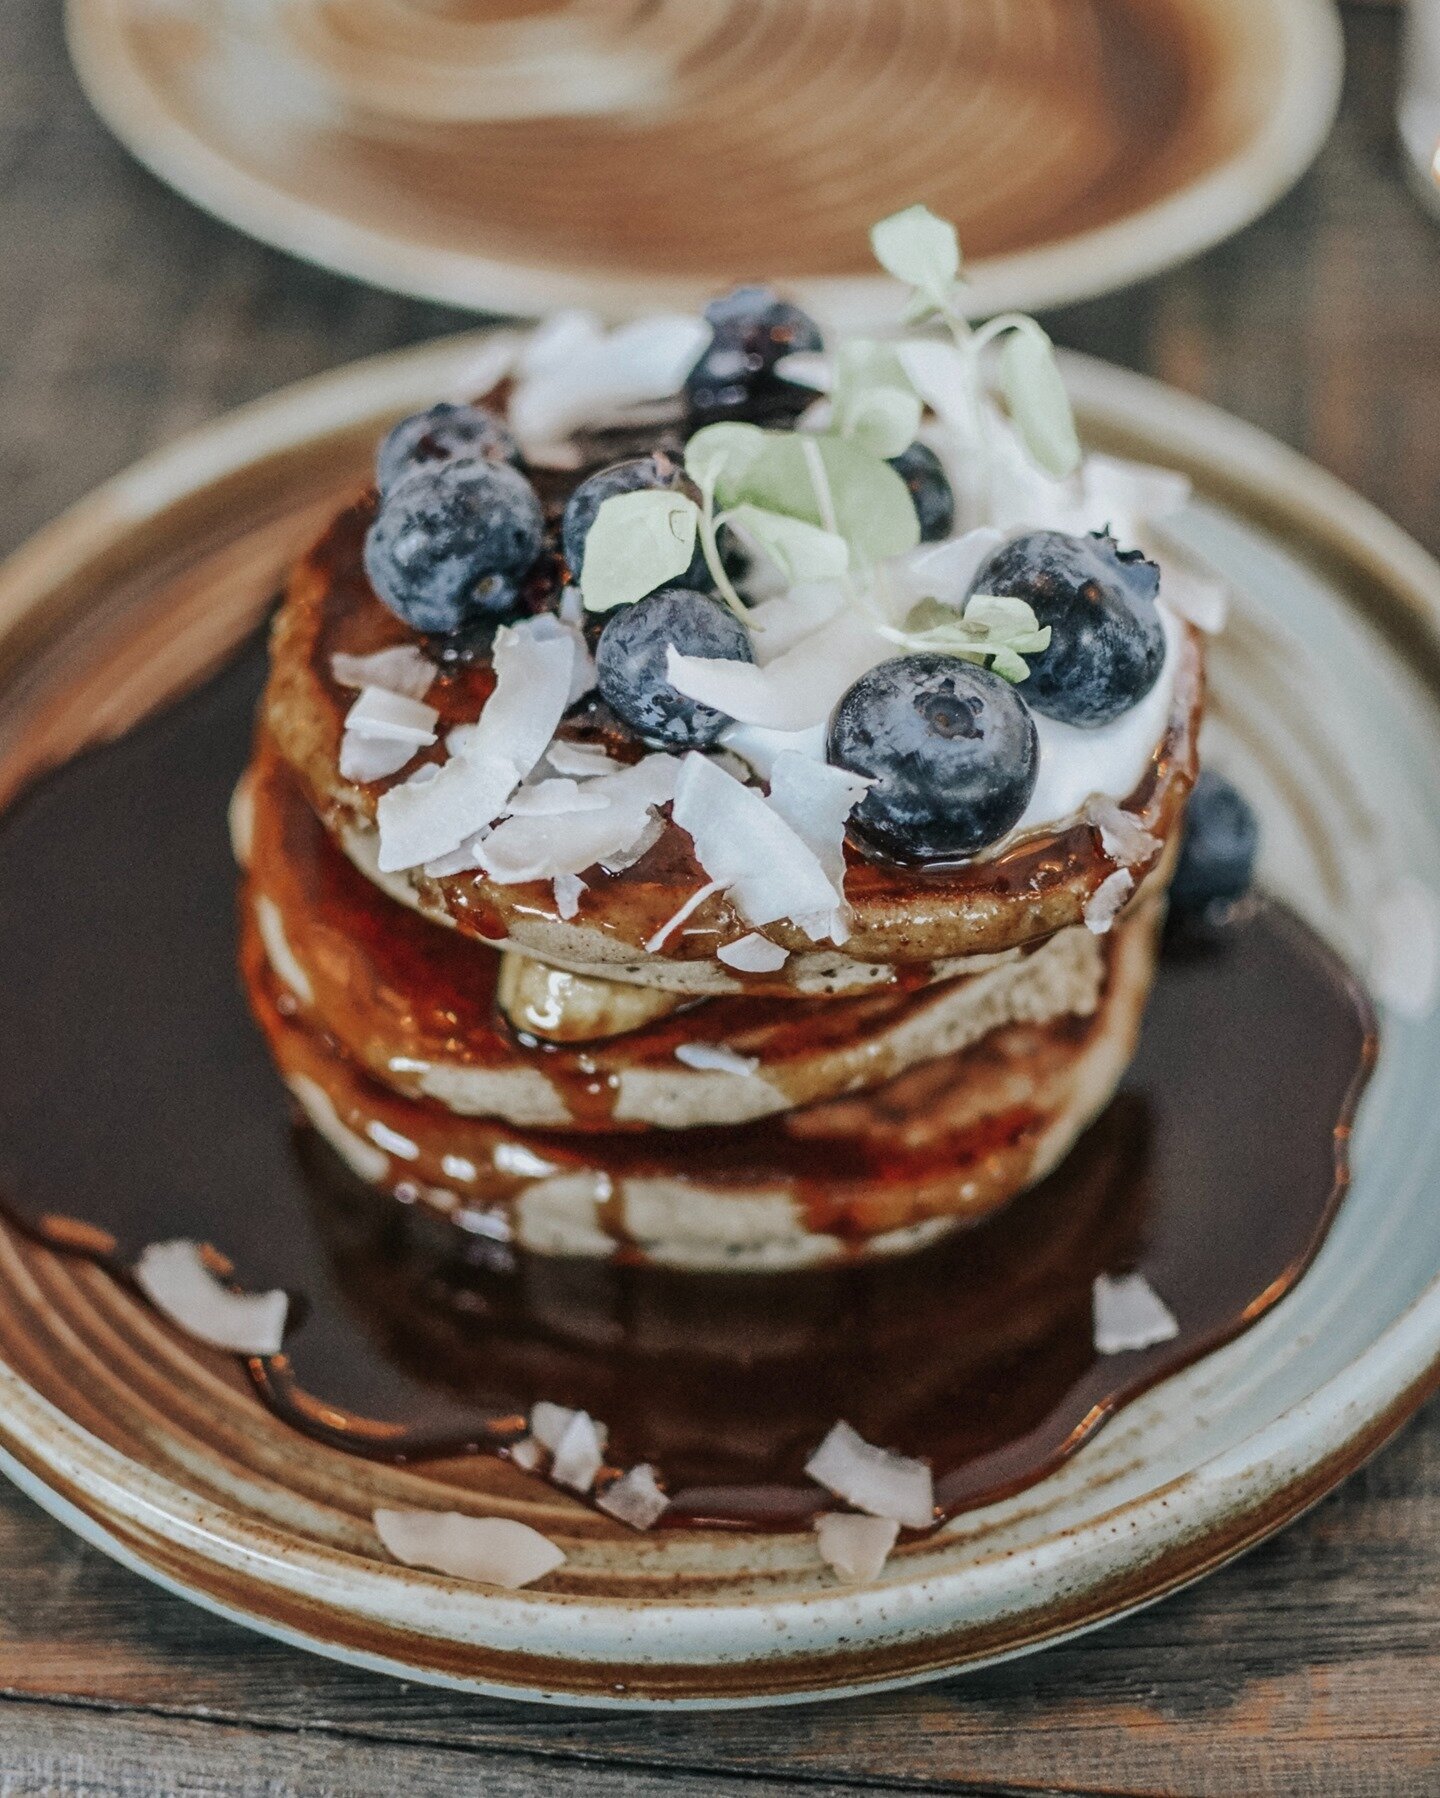 #PancakeDay Never looked so good! Add Jax Coco Coconut milk to your pancake mix for an added level of smooth sweetness. ⁠
⁠
#jaxcoco #coconutmilk #instafood